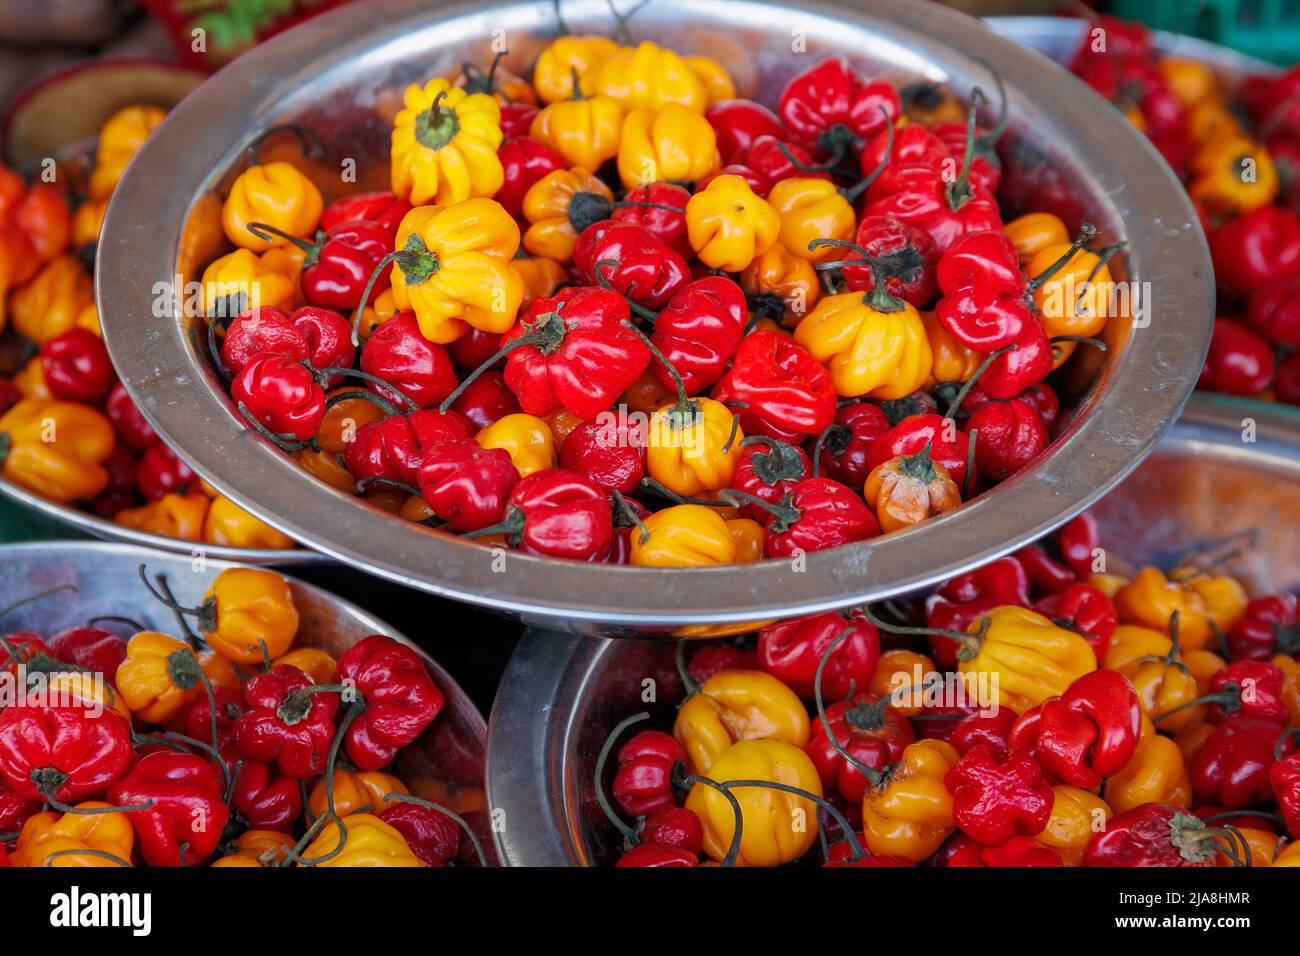 Spicy, hot, colourful chilli peppers, Capsicum chinense, on display on a market stall Stock Photo